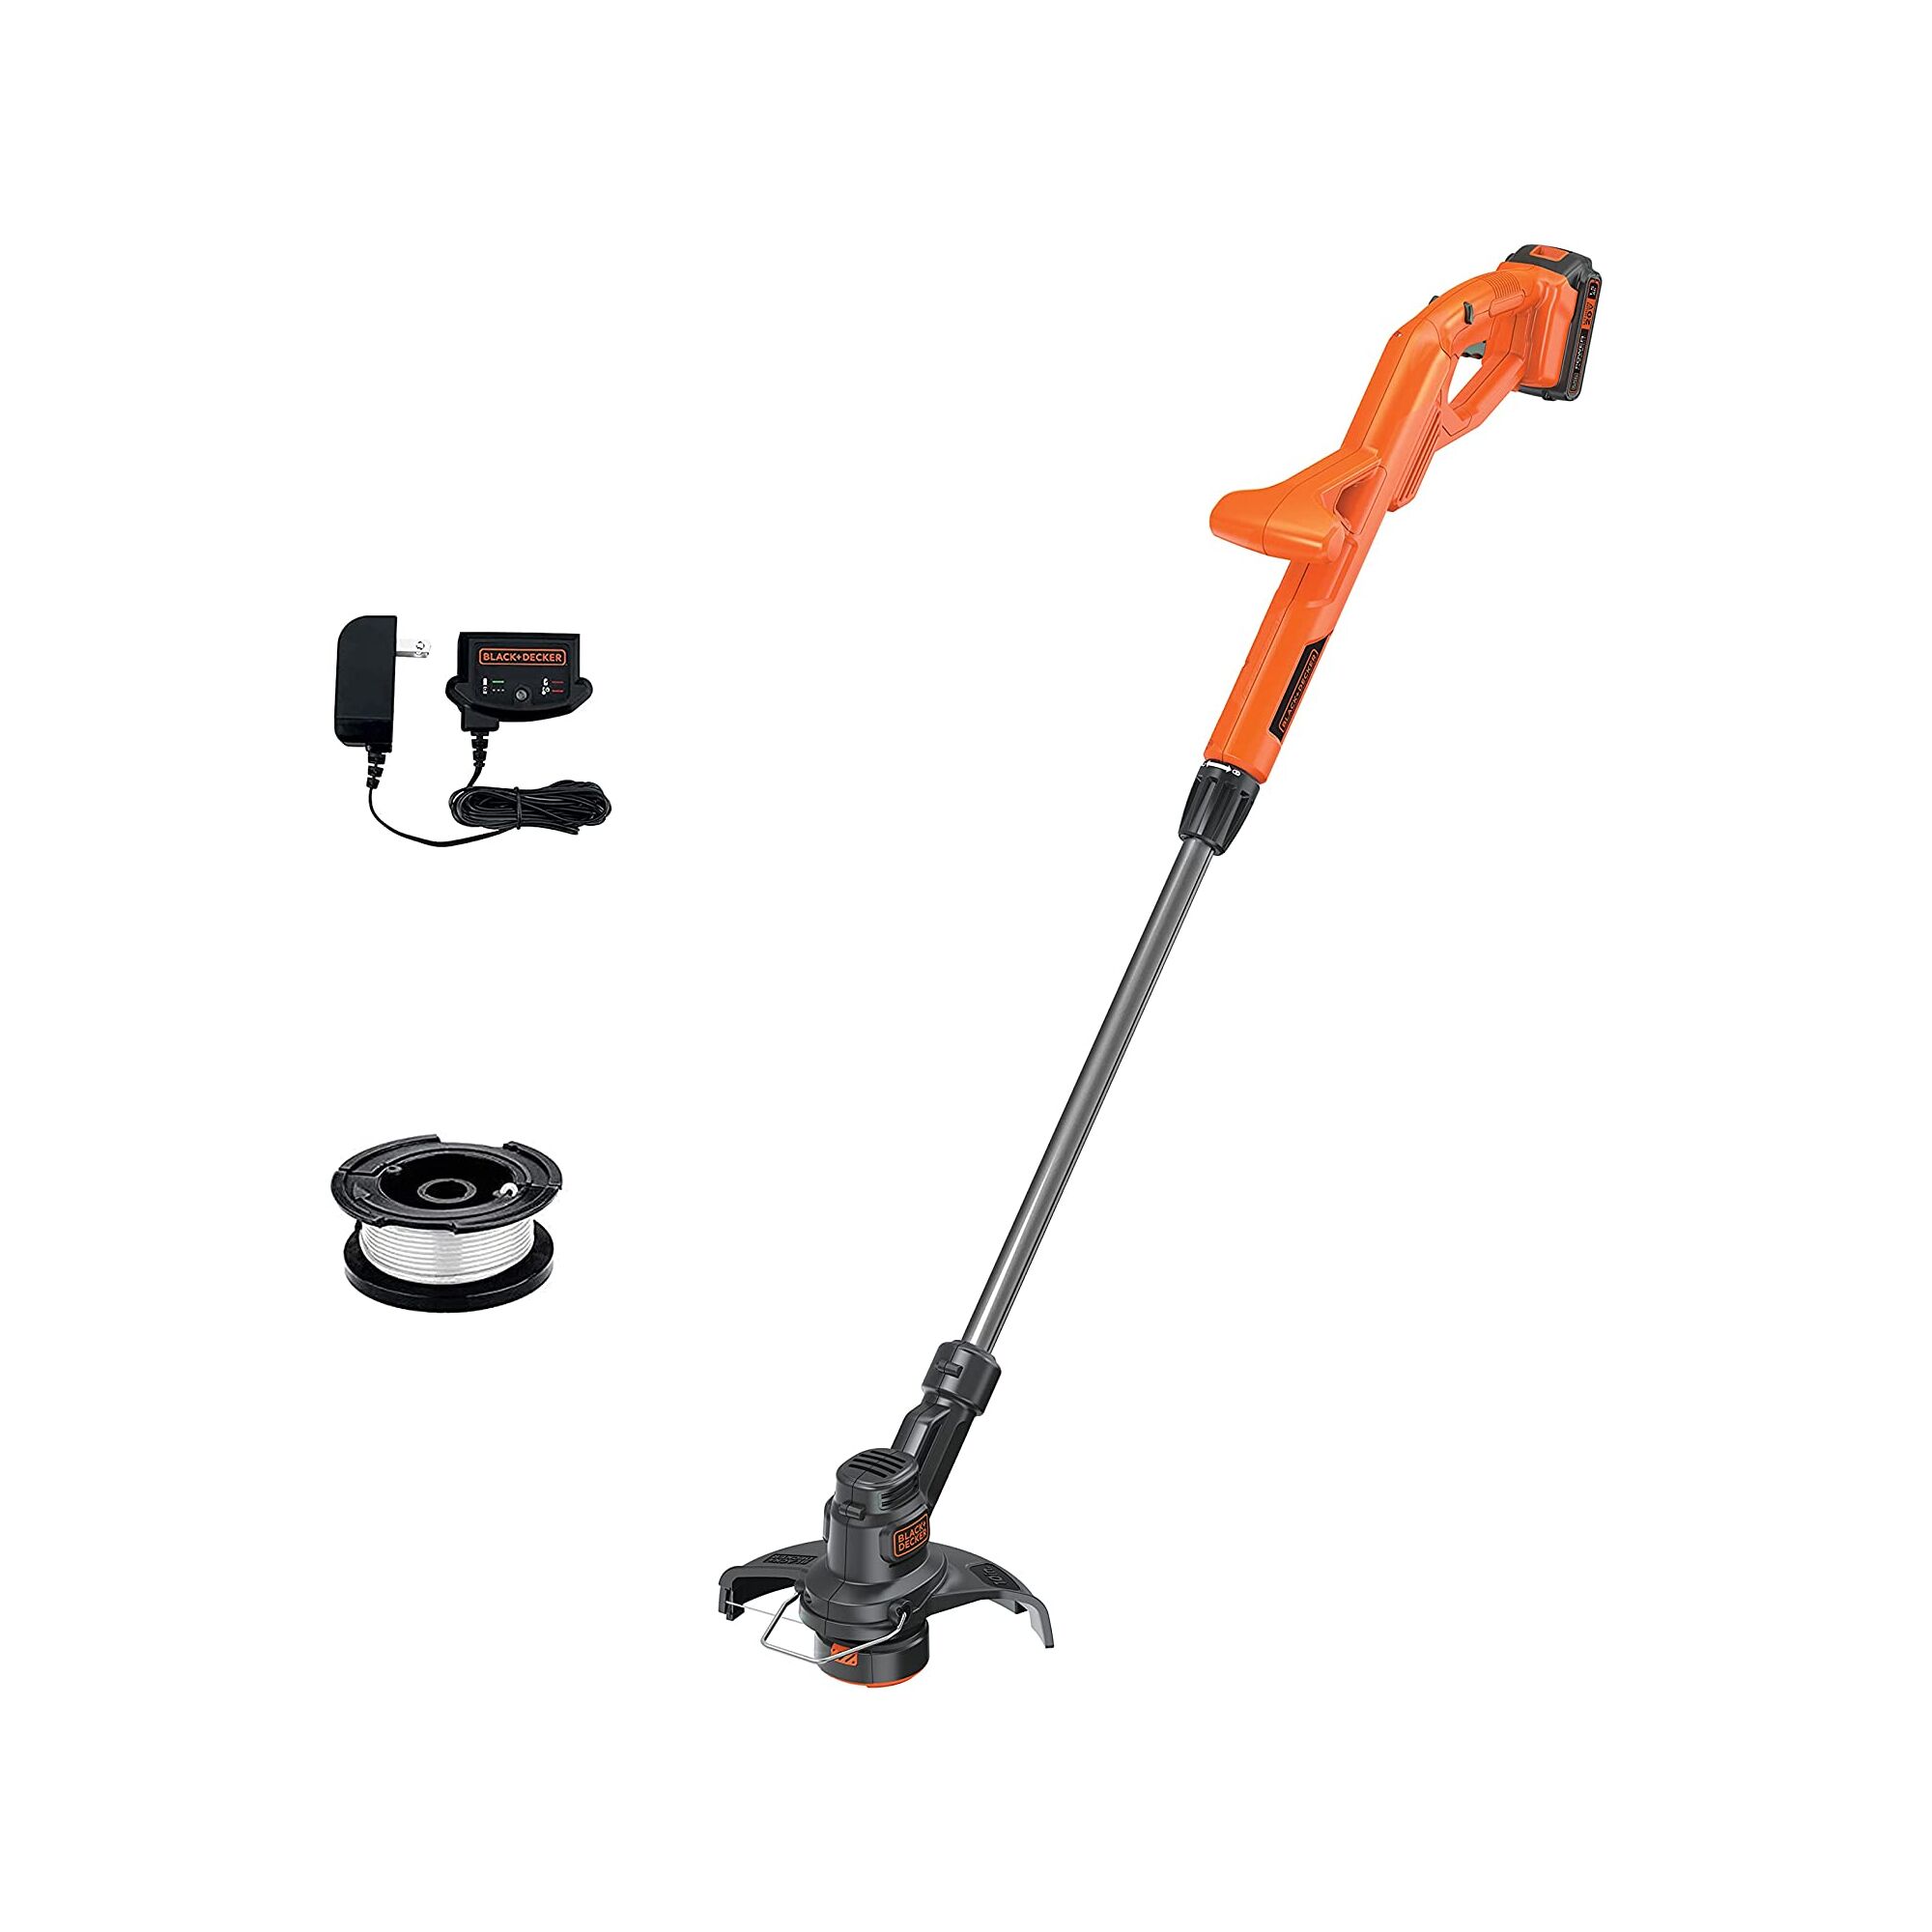 20V Max Lithium 10 In. String Trimmer / Edger with charger and spool of trimmer string.